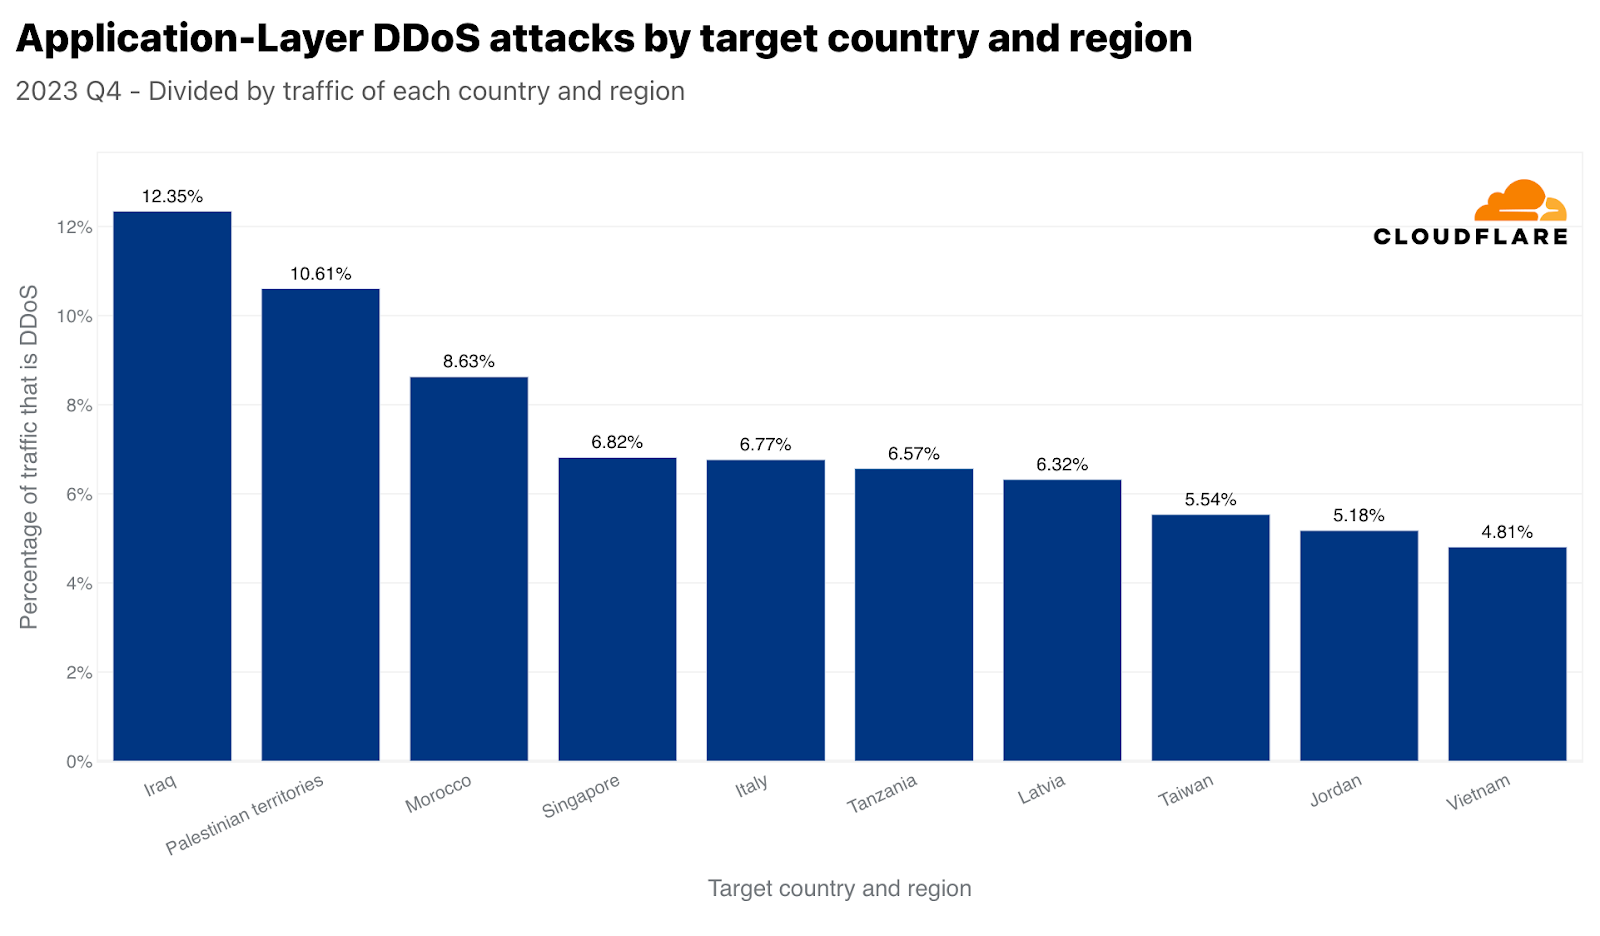 Top targeted countries by HTTP DDoS attacks with respect to each country’s traffic